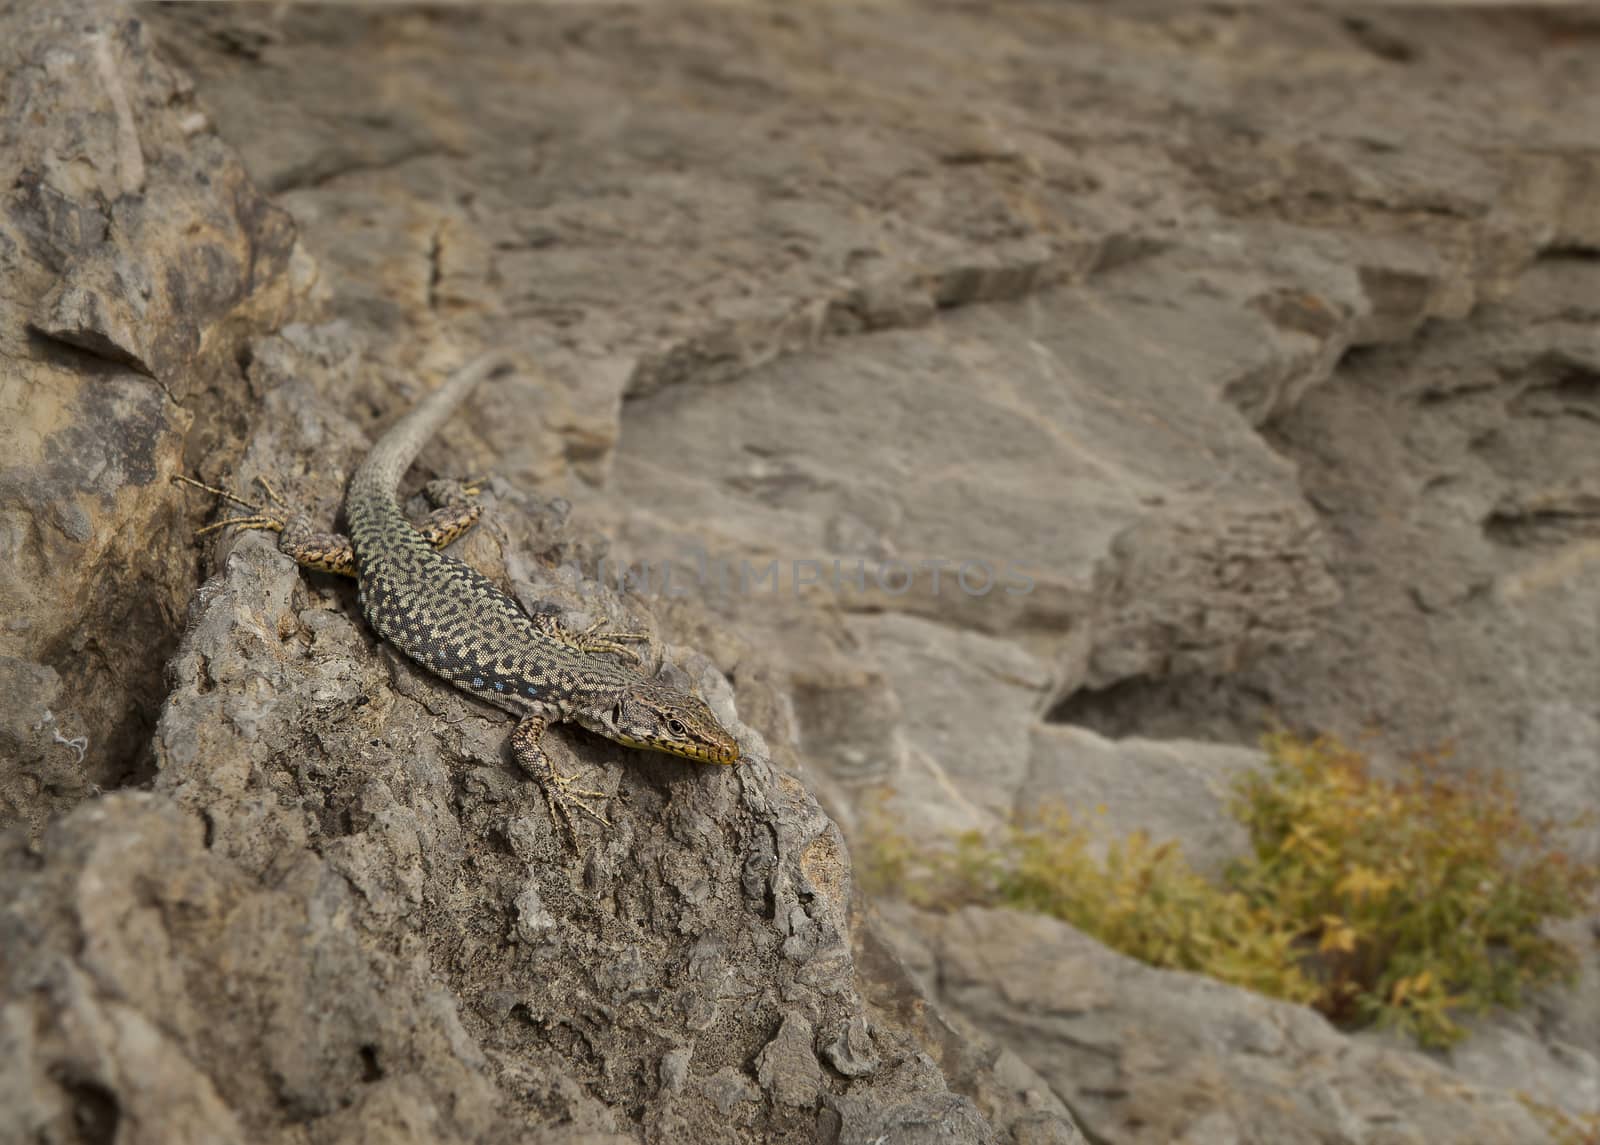 Colorful lizard sitting on the rocks in the mountains.







Spotted lizard sitting on the stones.